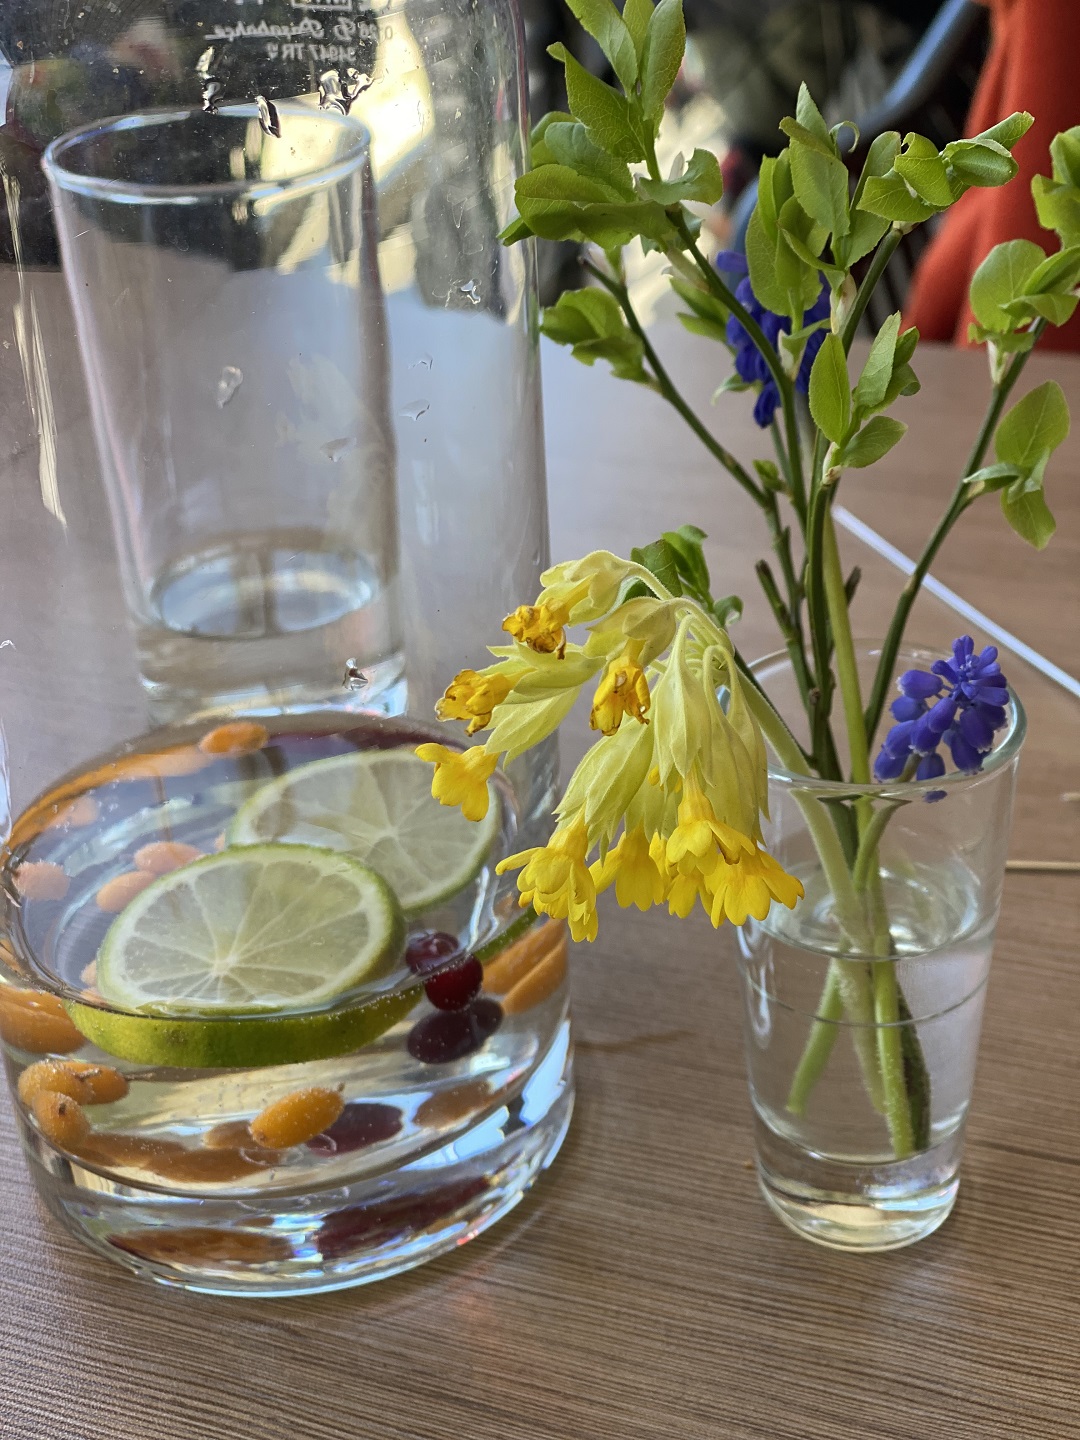 Local Estonian fruits and flowers in every water jug